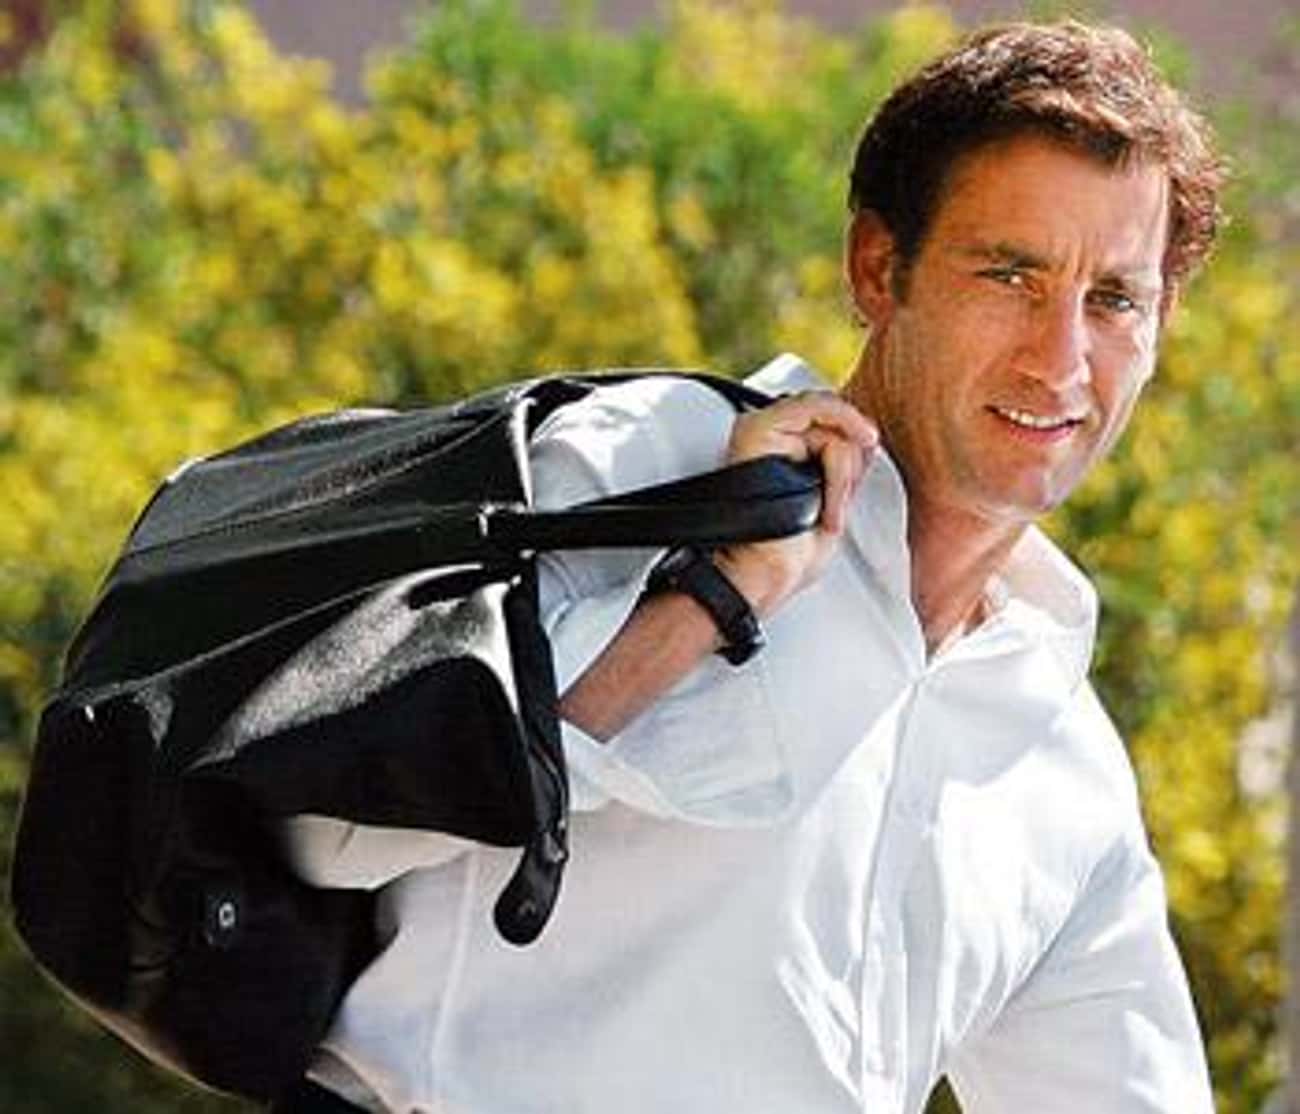 Clive Owen in White Long Sleeves and Designer Bag